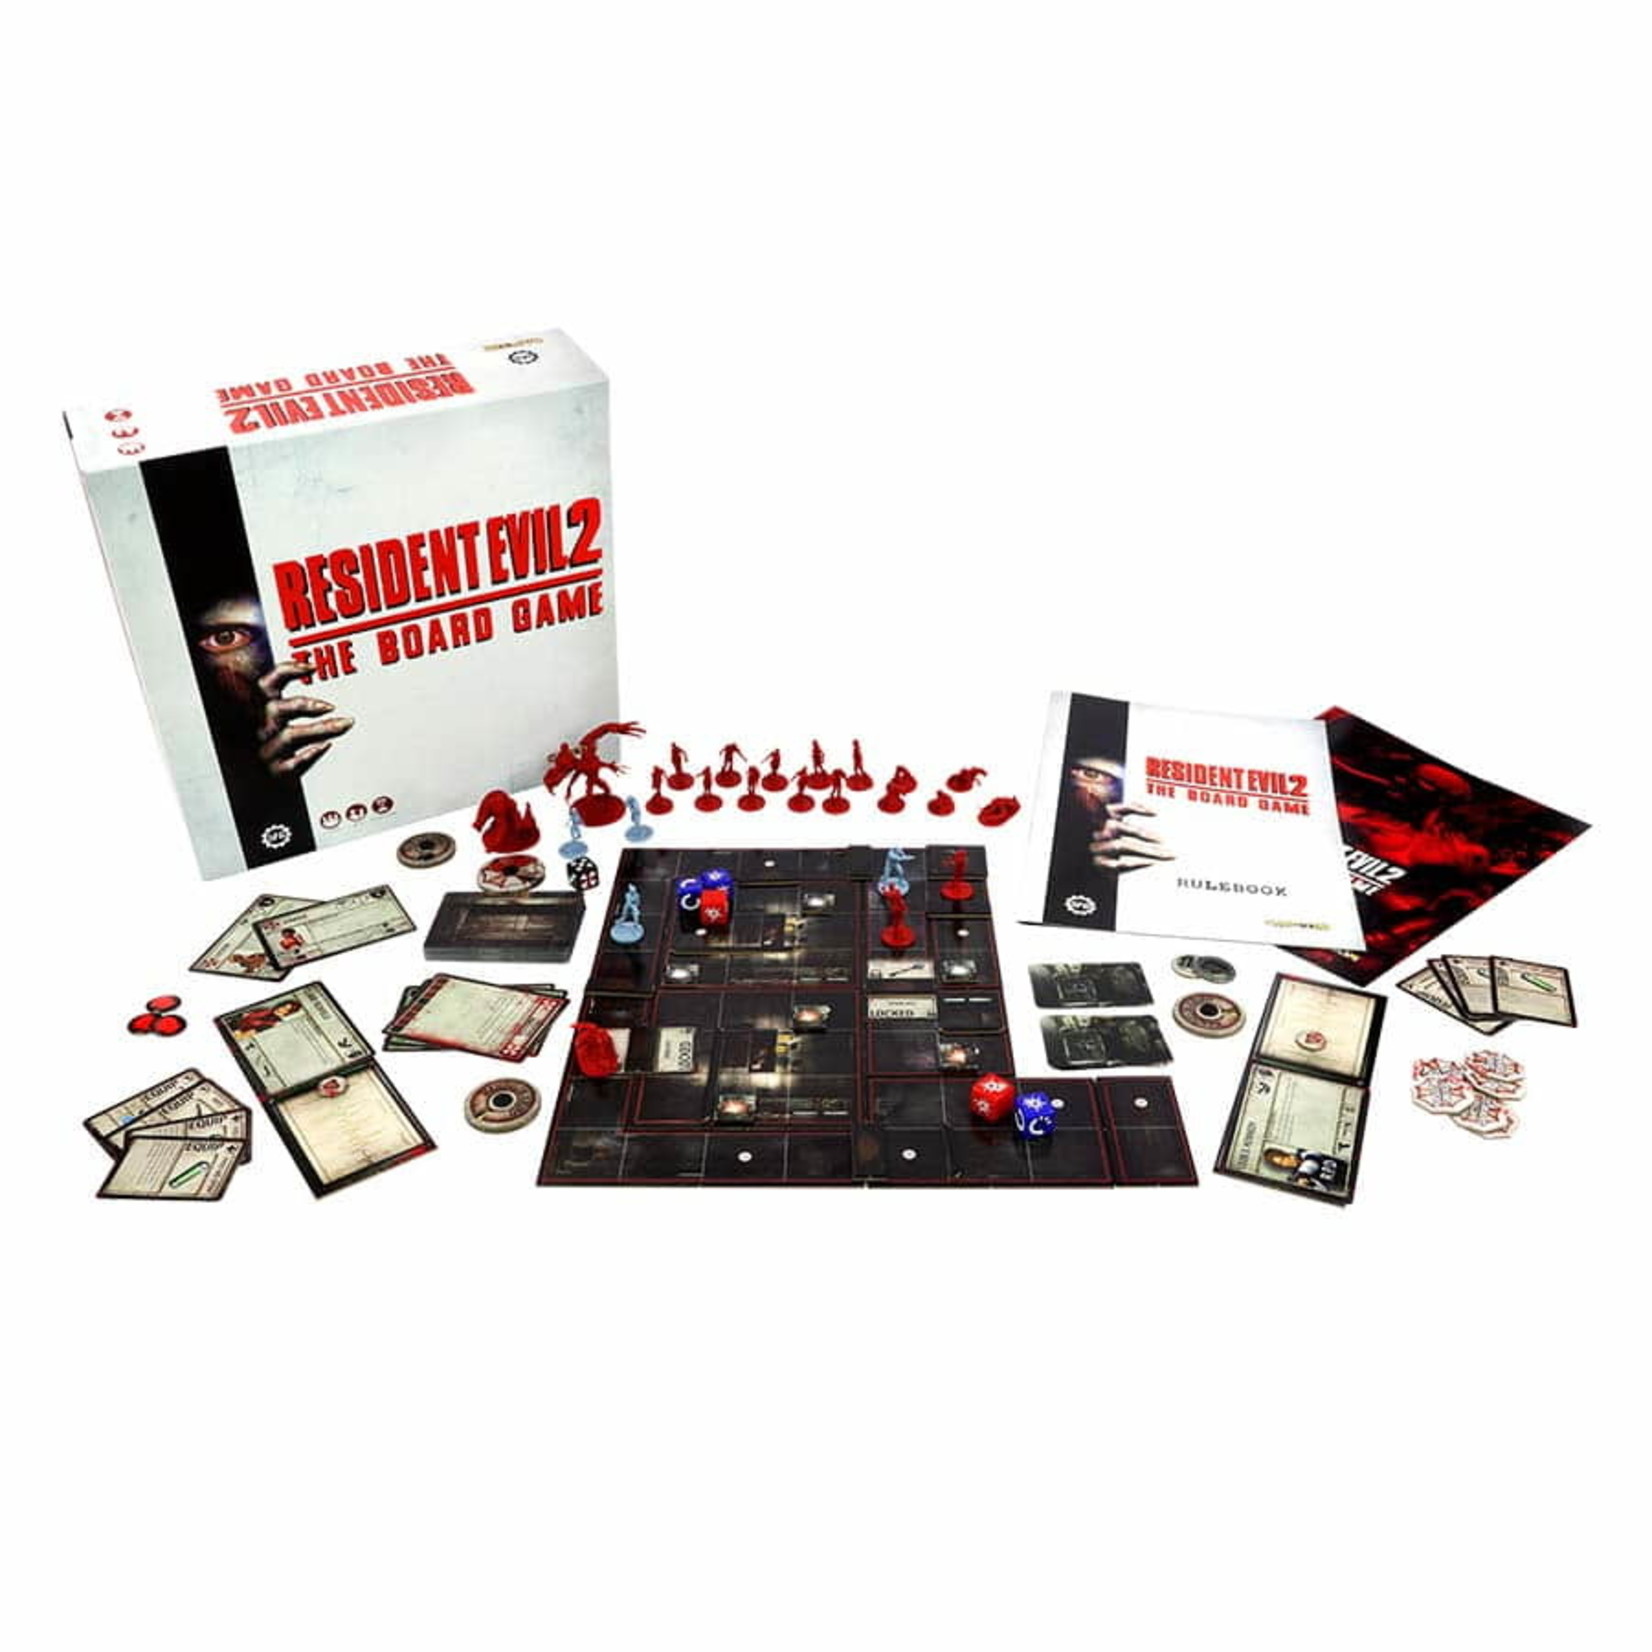 Steamforged Games Ltd Resident Evil 2 The Board Game